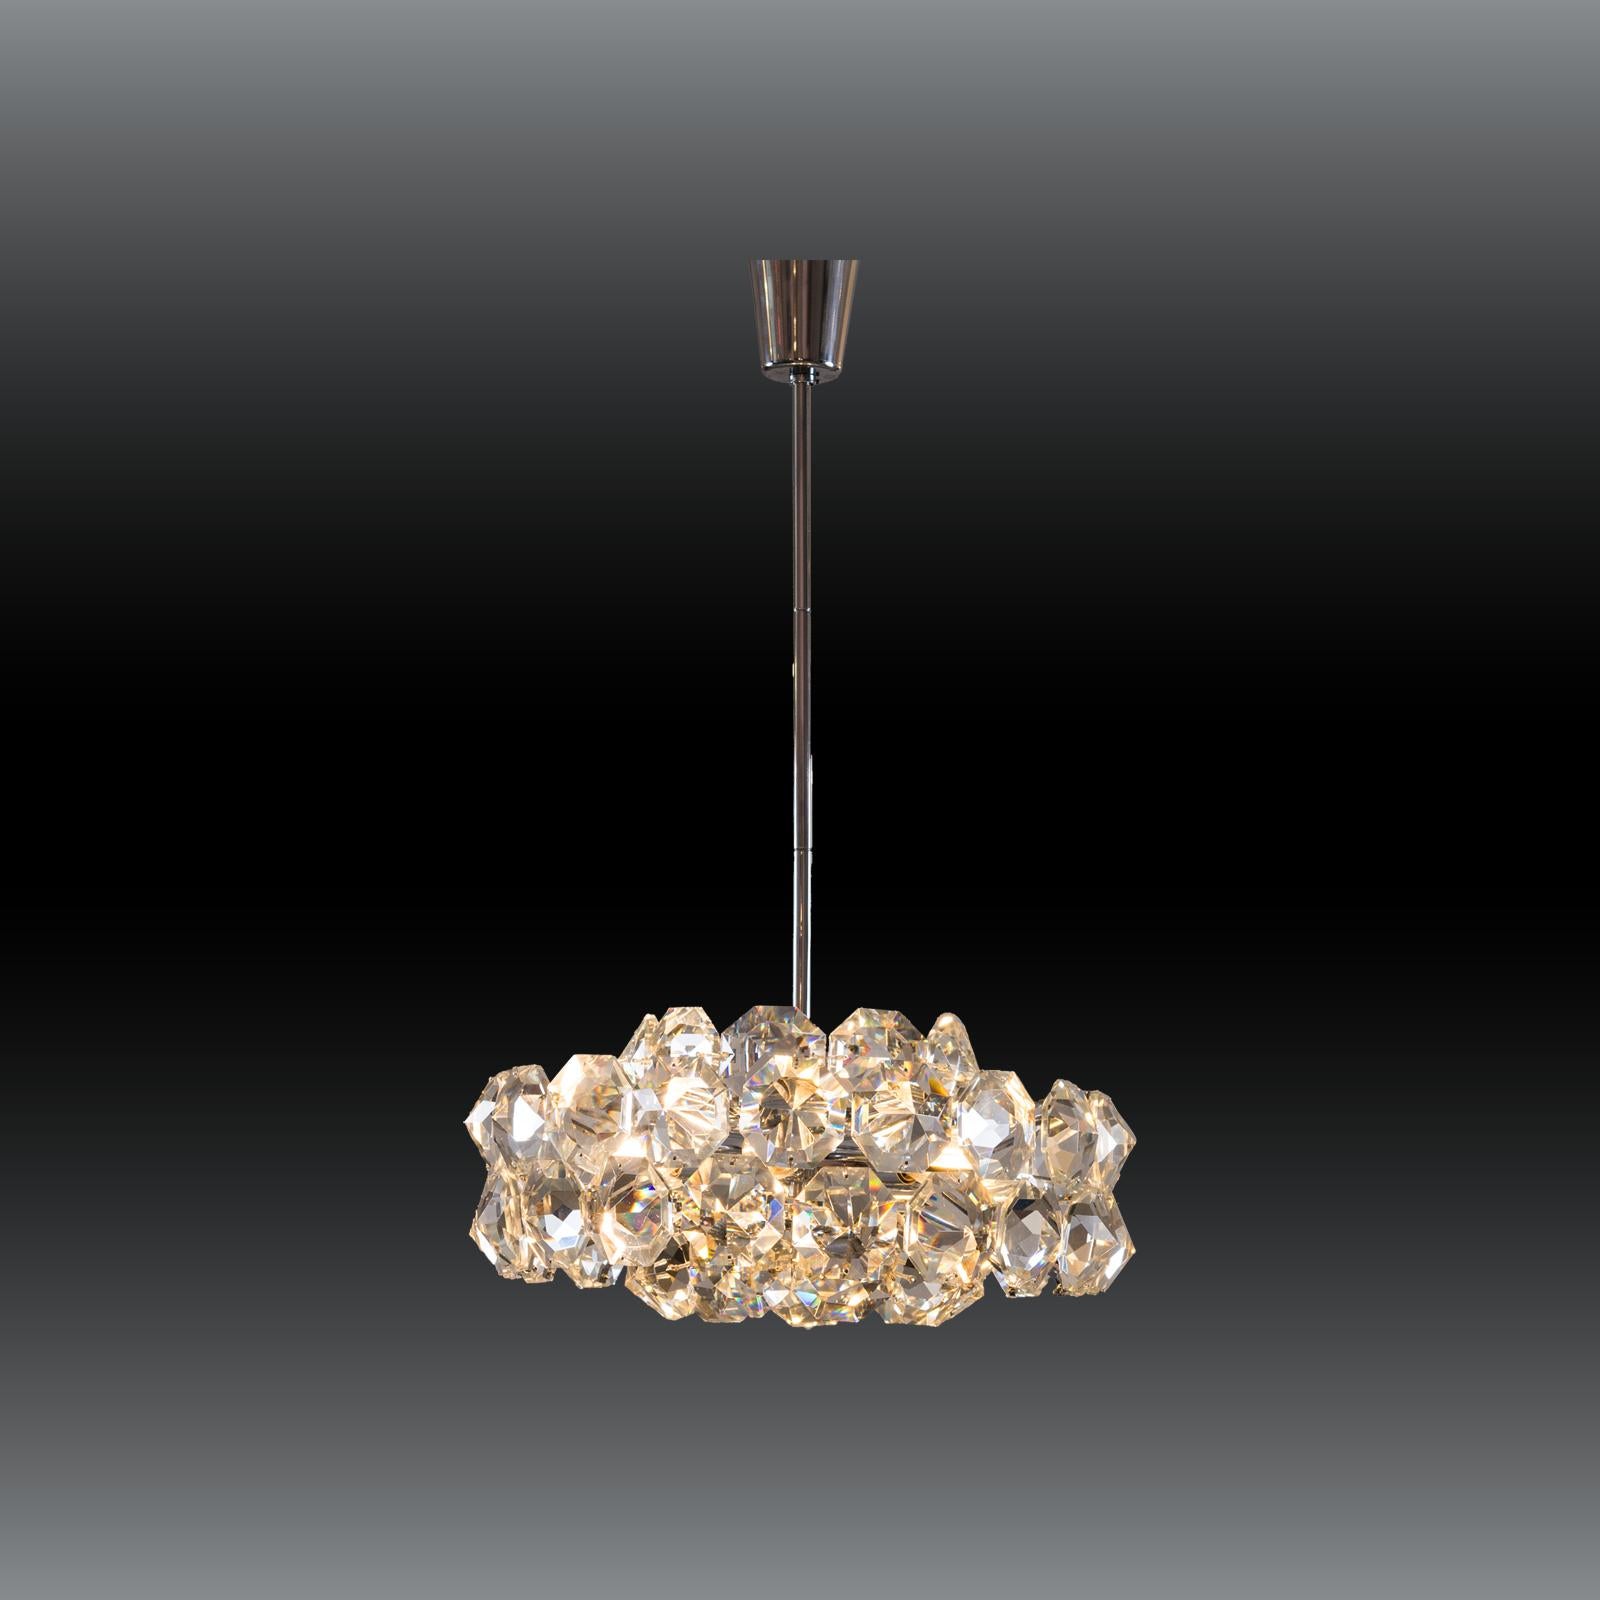 A beautiful middle-size chandelier with more than 50 handcut glass-stones.